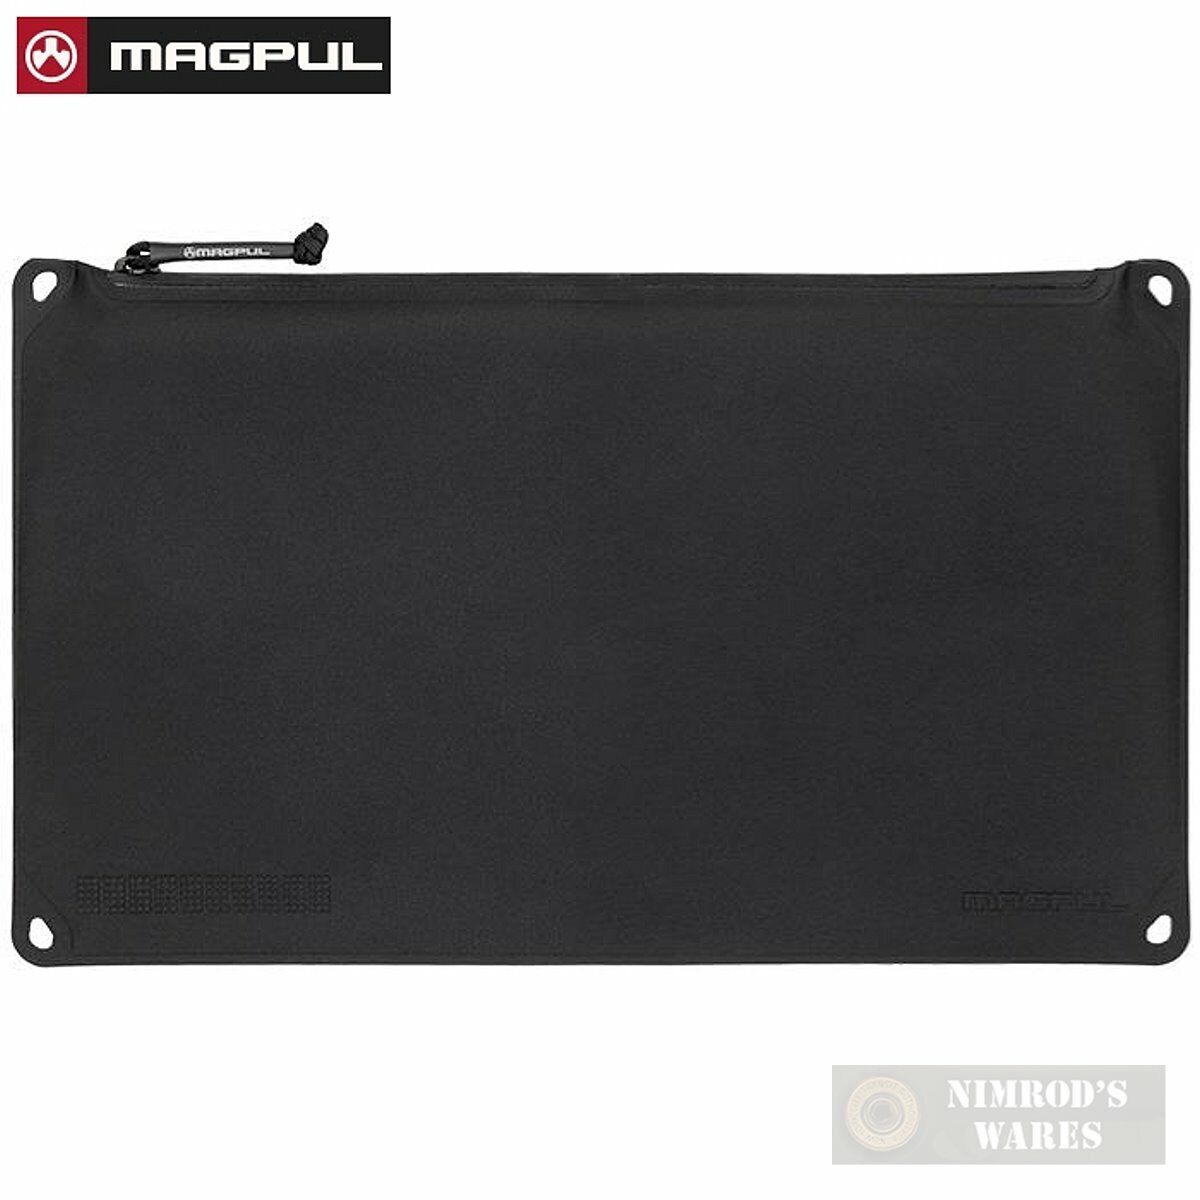 MAGPUL DAKA Pouch New popularity OFFicial site XL 9.8